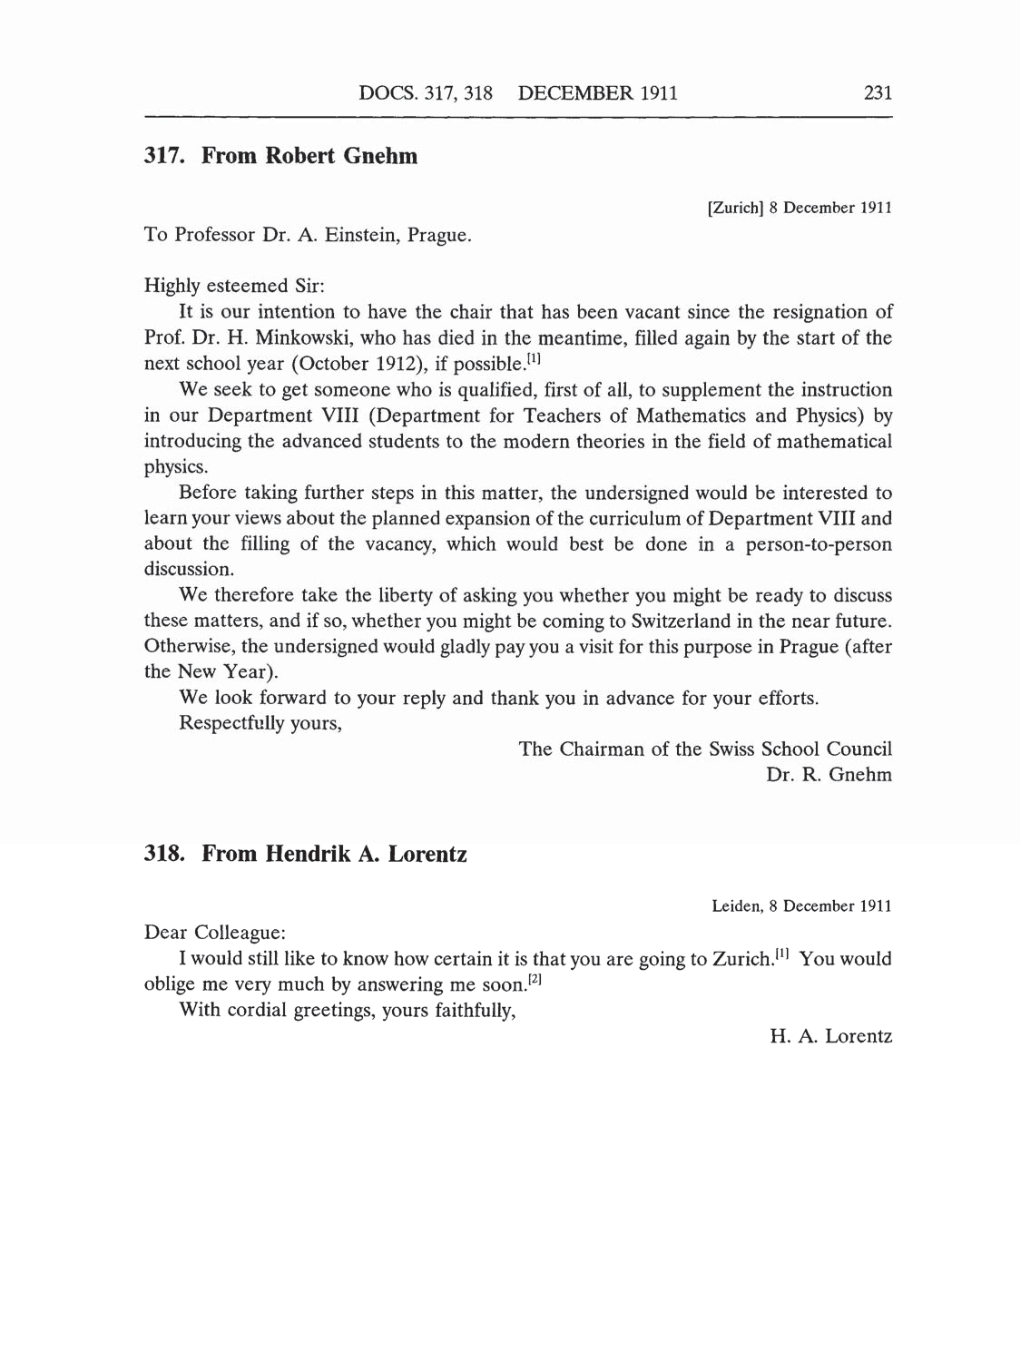 Volume 5: The Swiss Years: Correspondence, 1902-1914 (English translation supplement) page 231